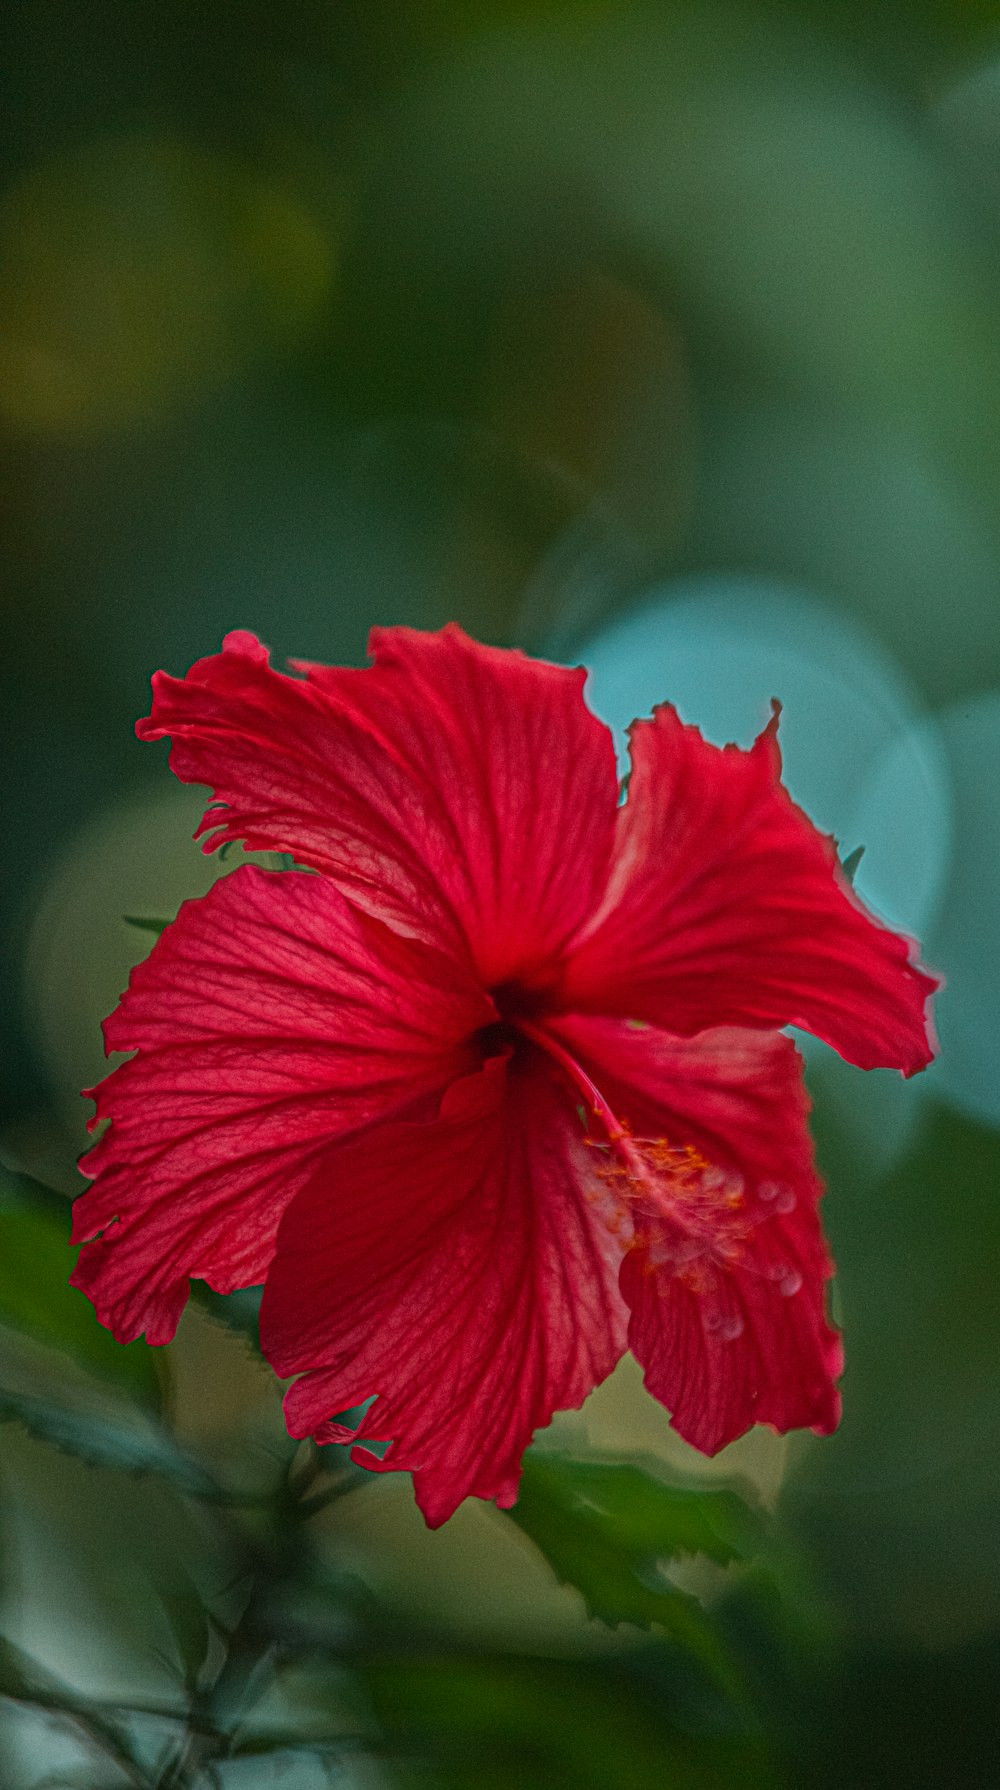 red hibiscus in bloom in close up photography